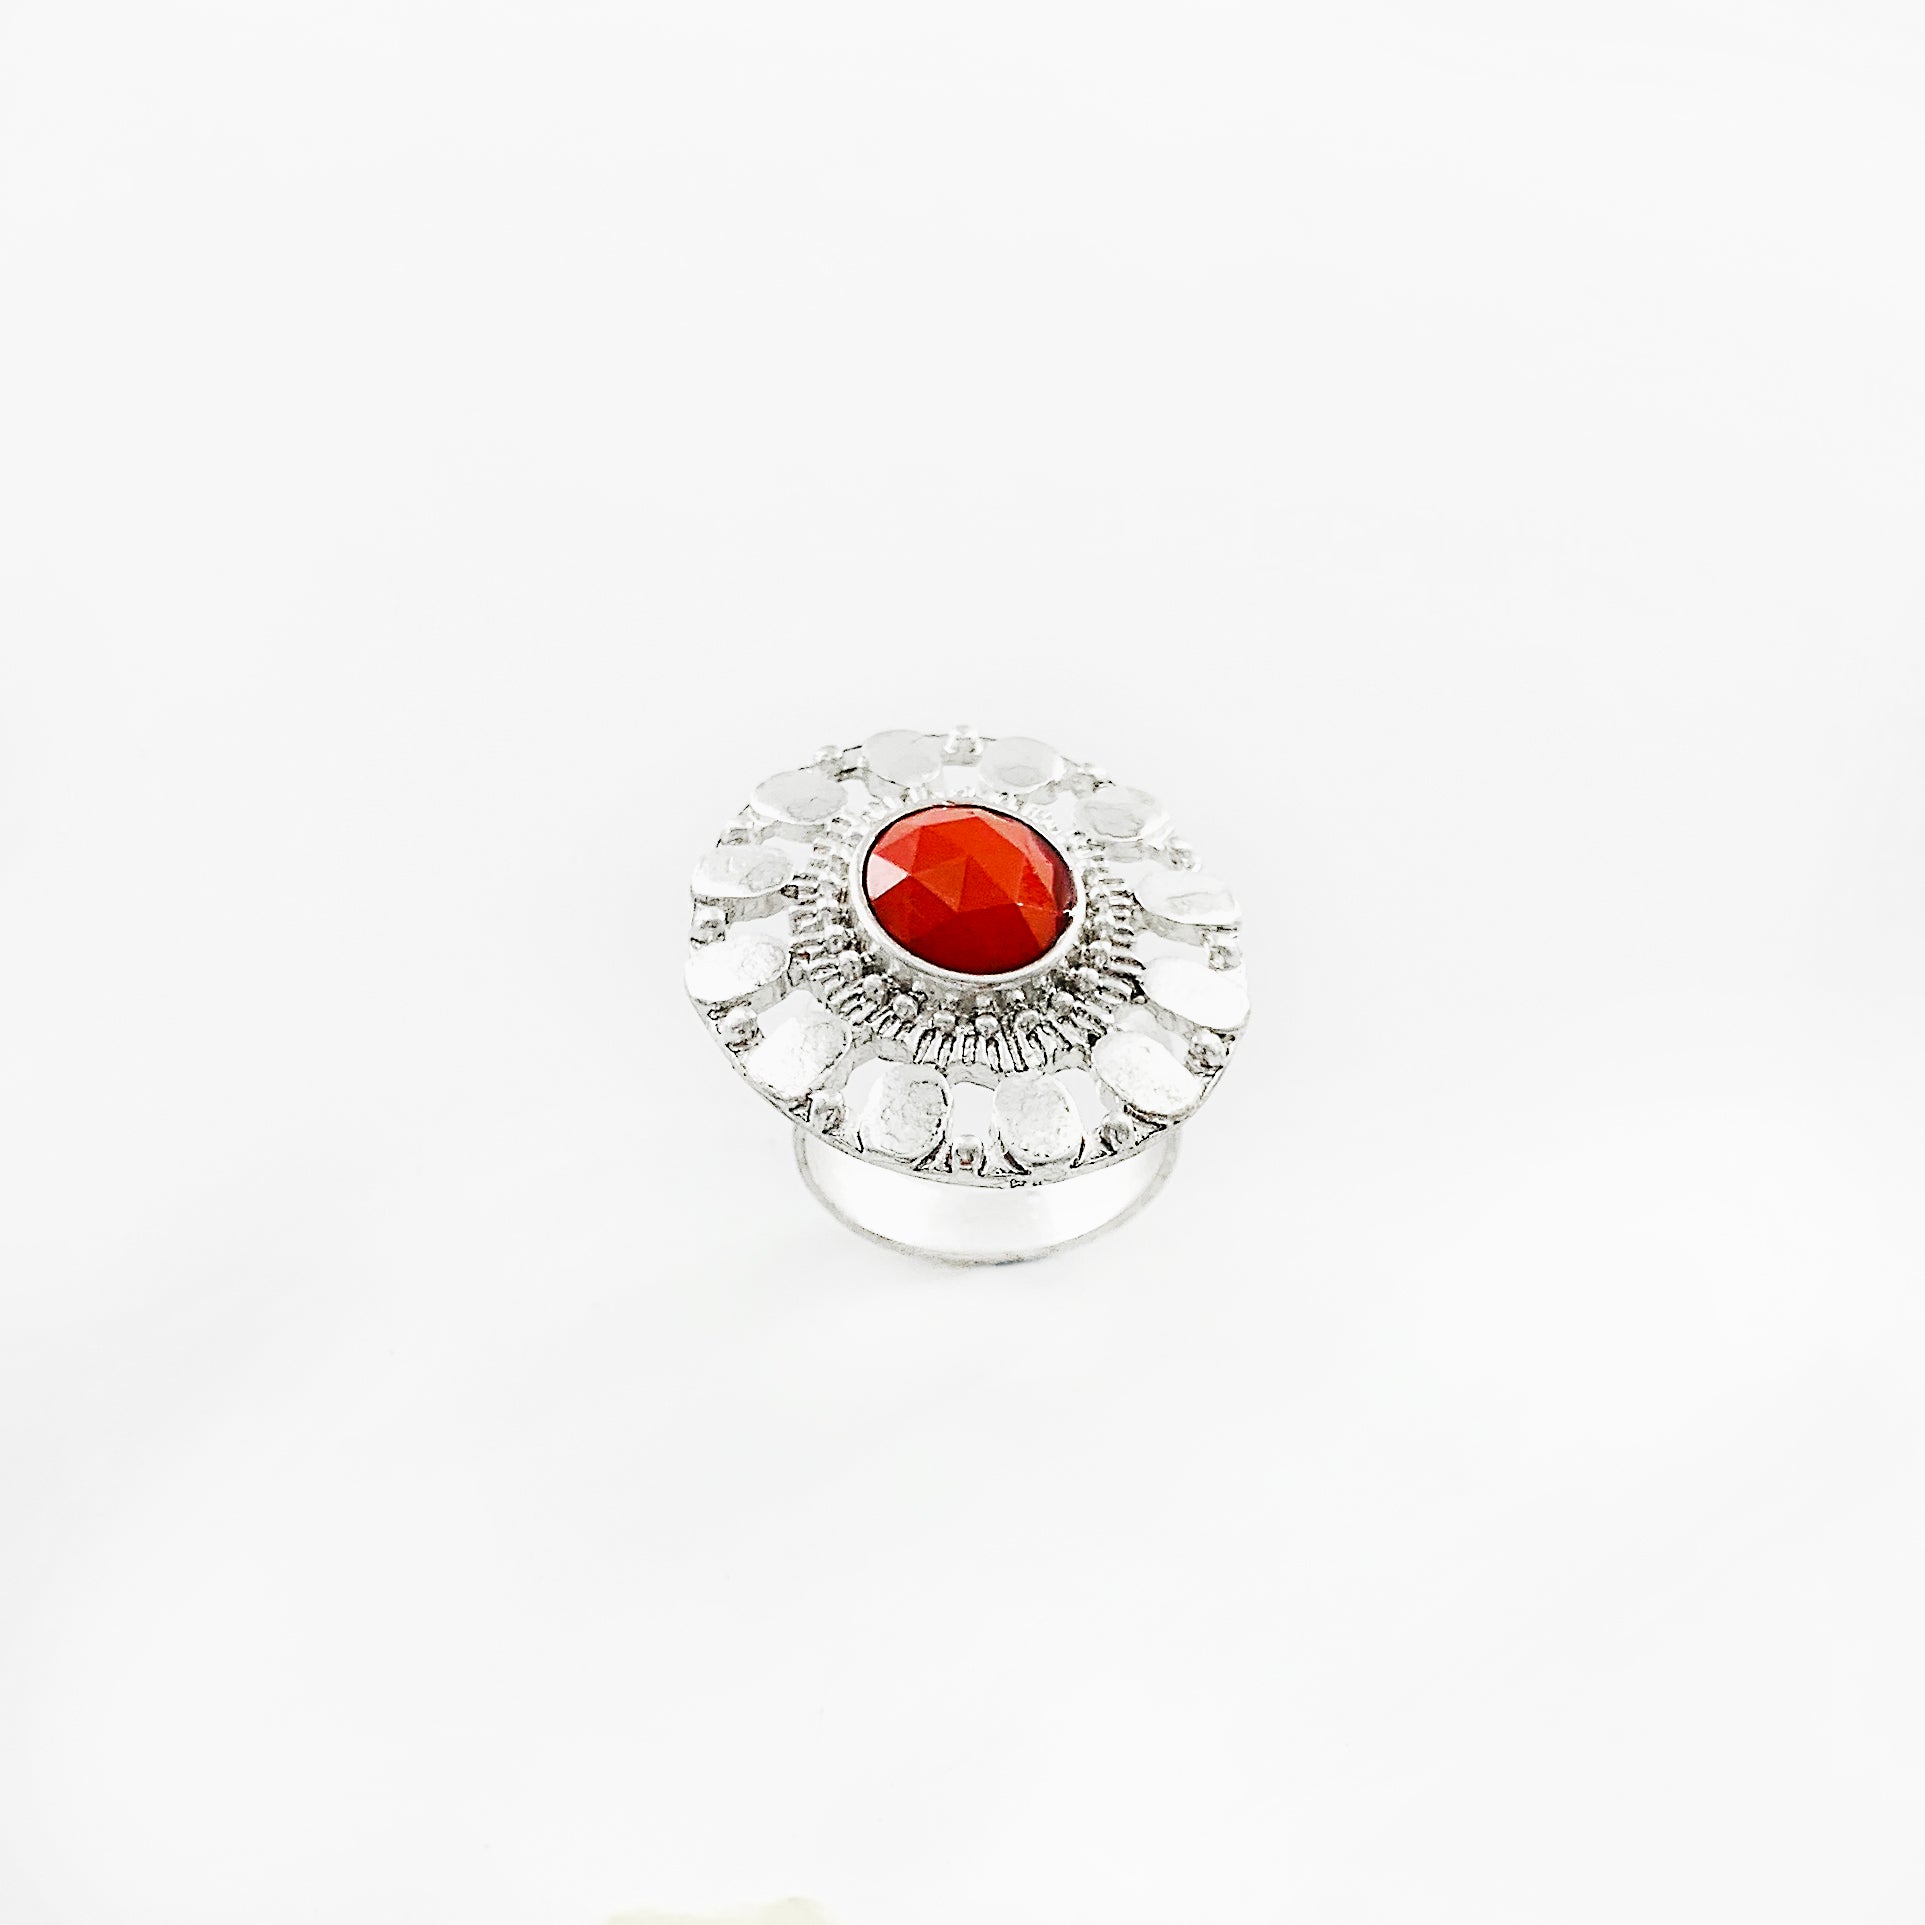 Art deco inspired silver ring with red stone